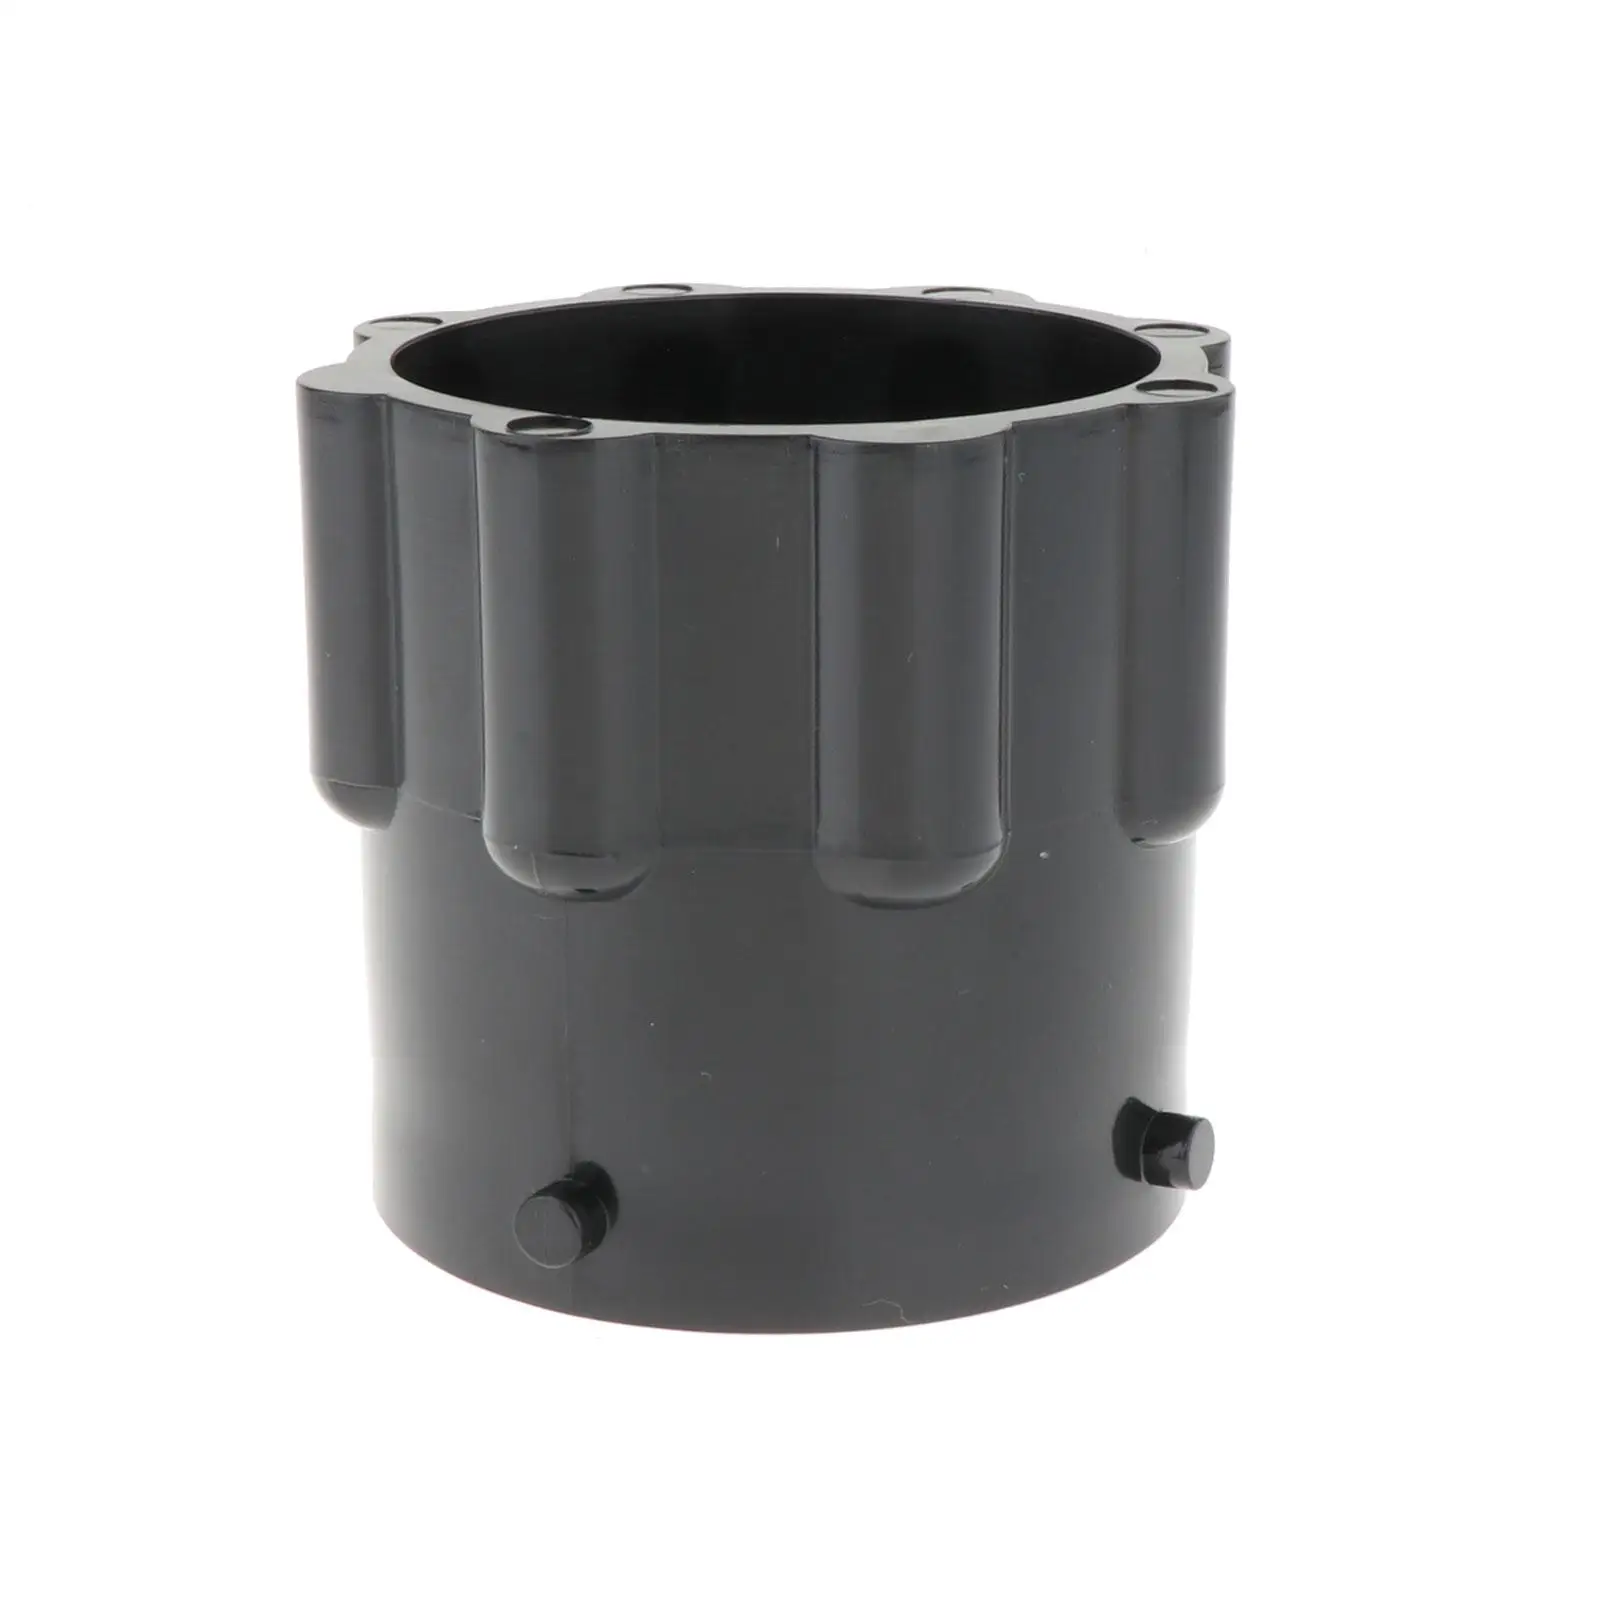 RV Sewage Adapter Easy Installation Replace Professional Termination Adapter